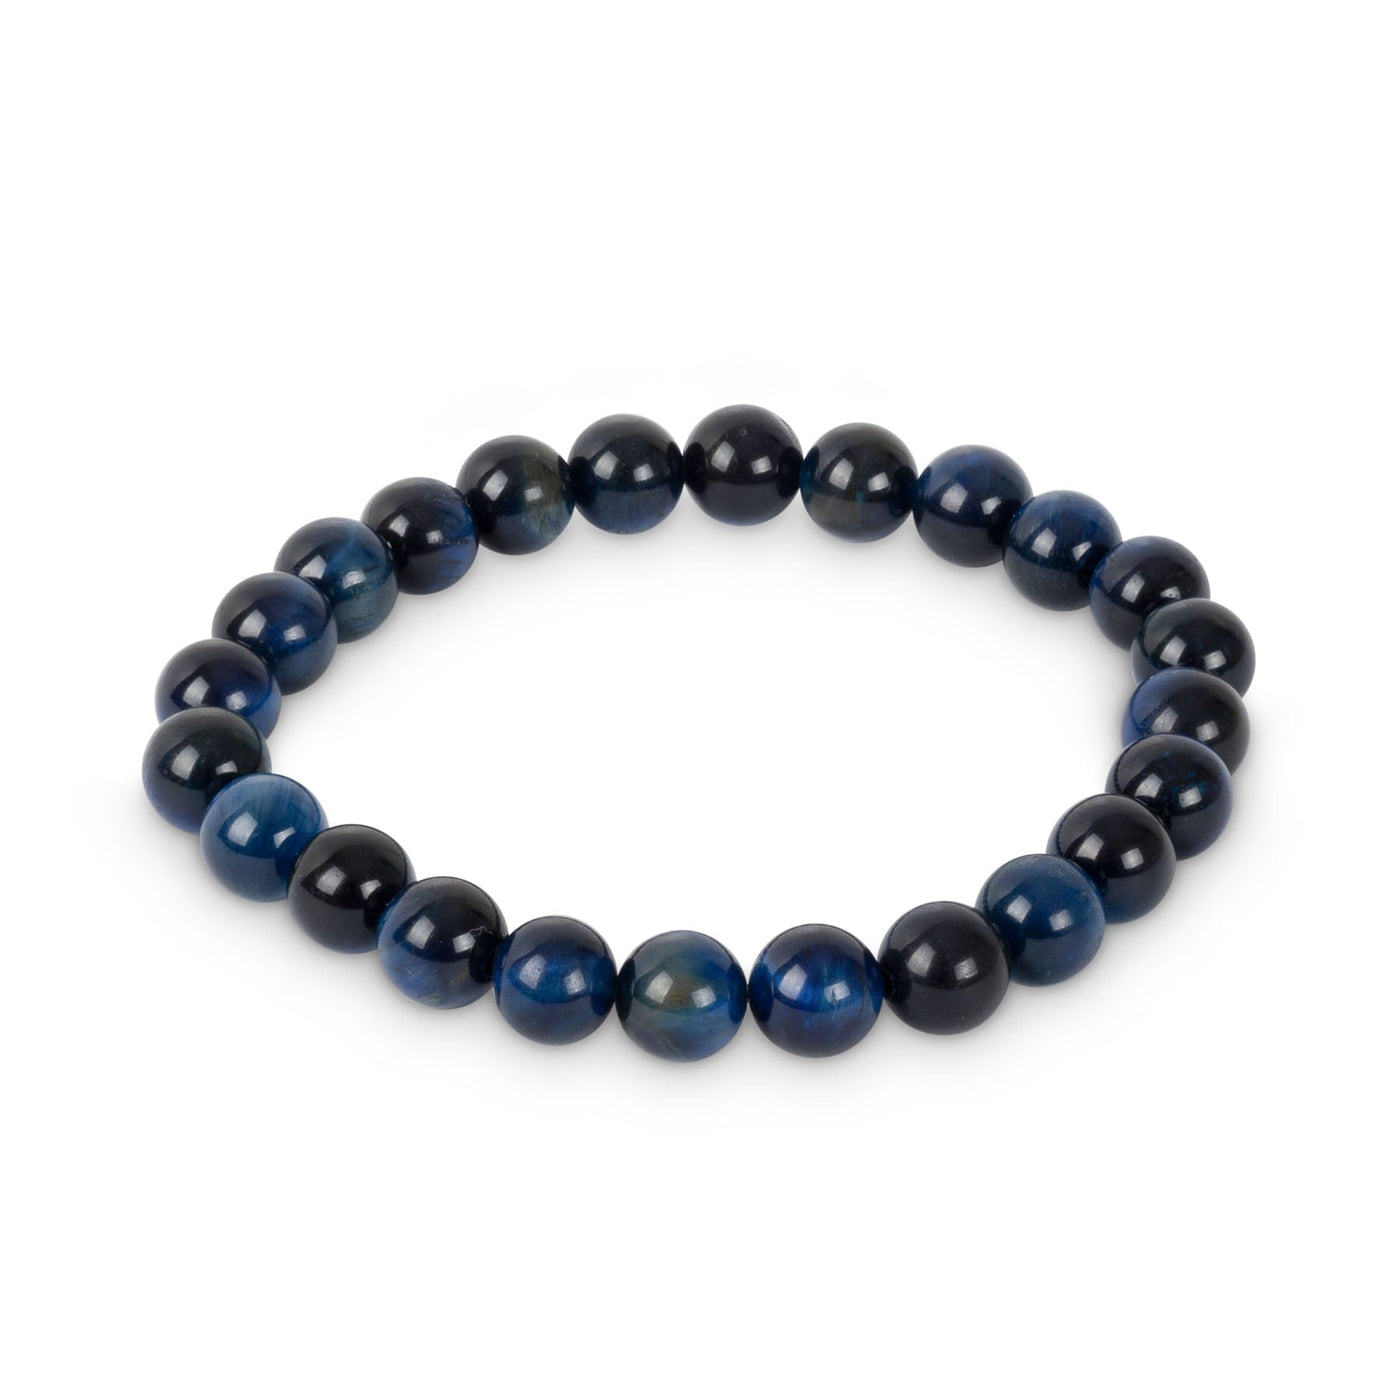 Beadstone Blue and Black